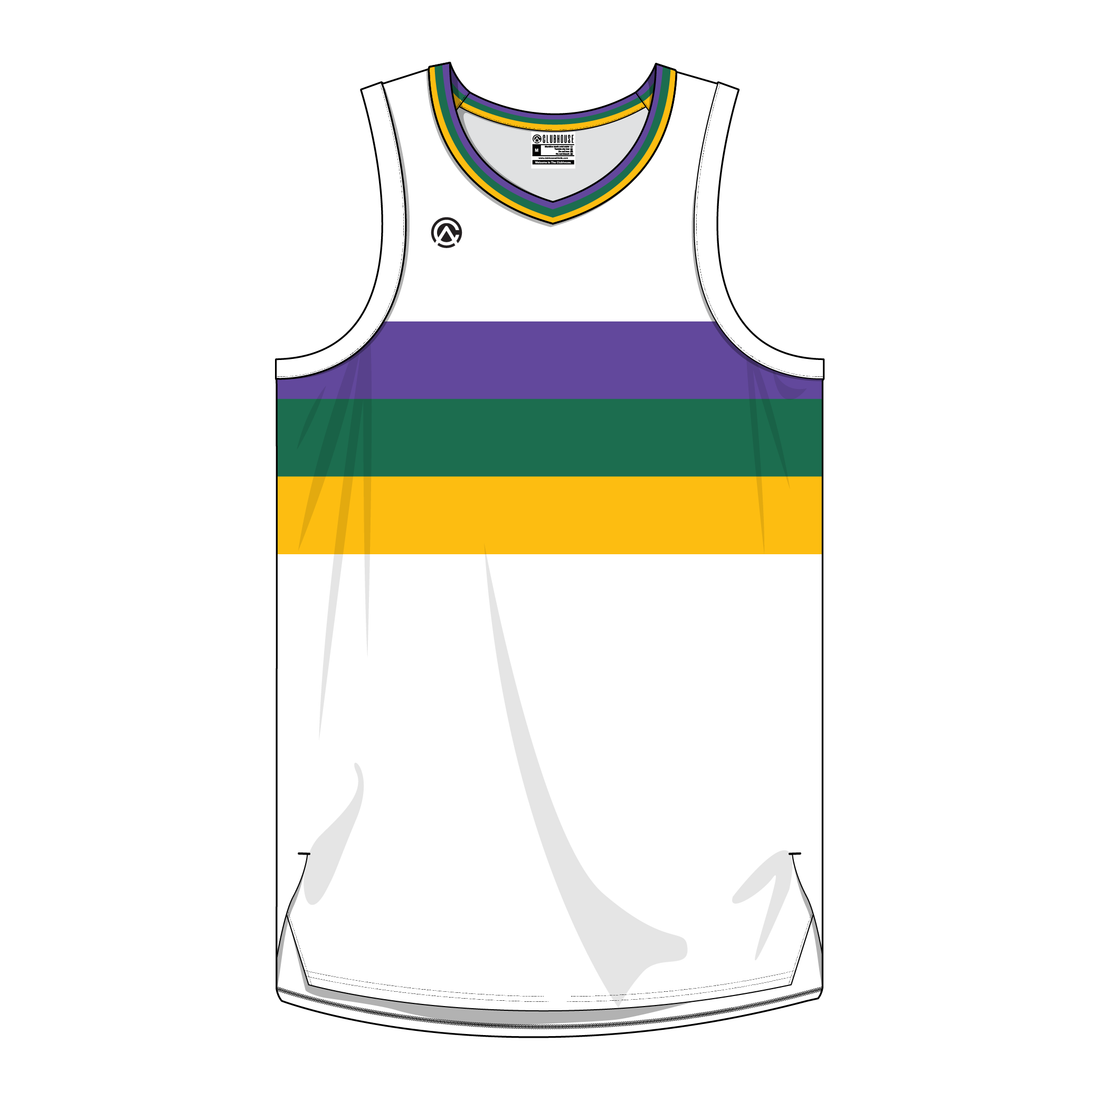 Clubhouse Original: New Orleans Basketball Jersey